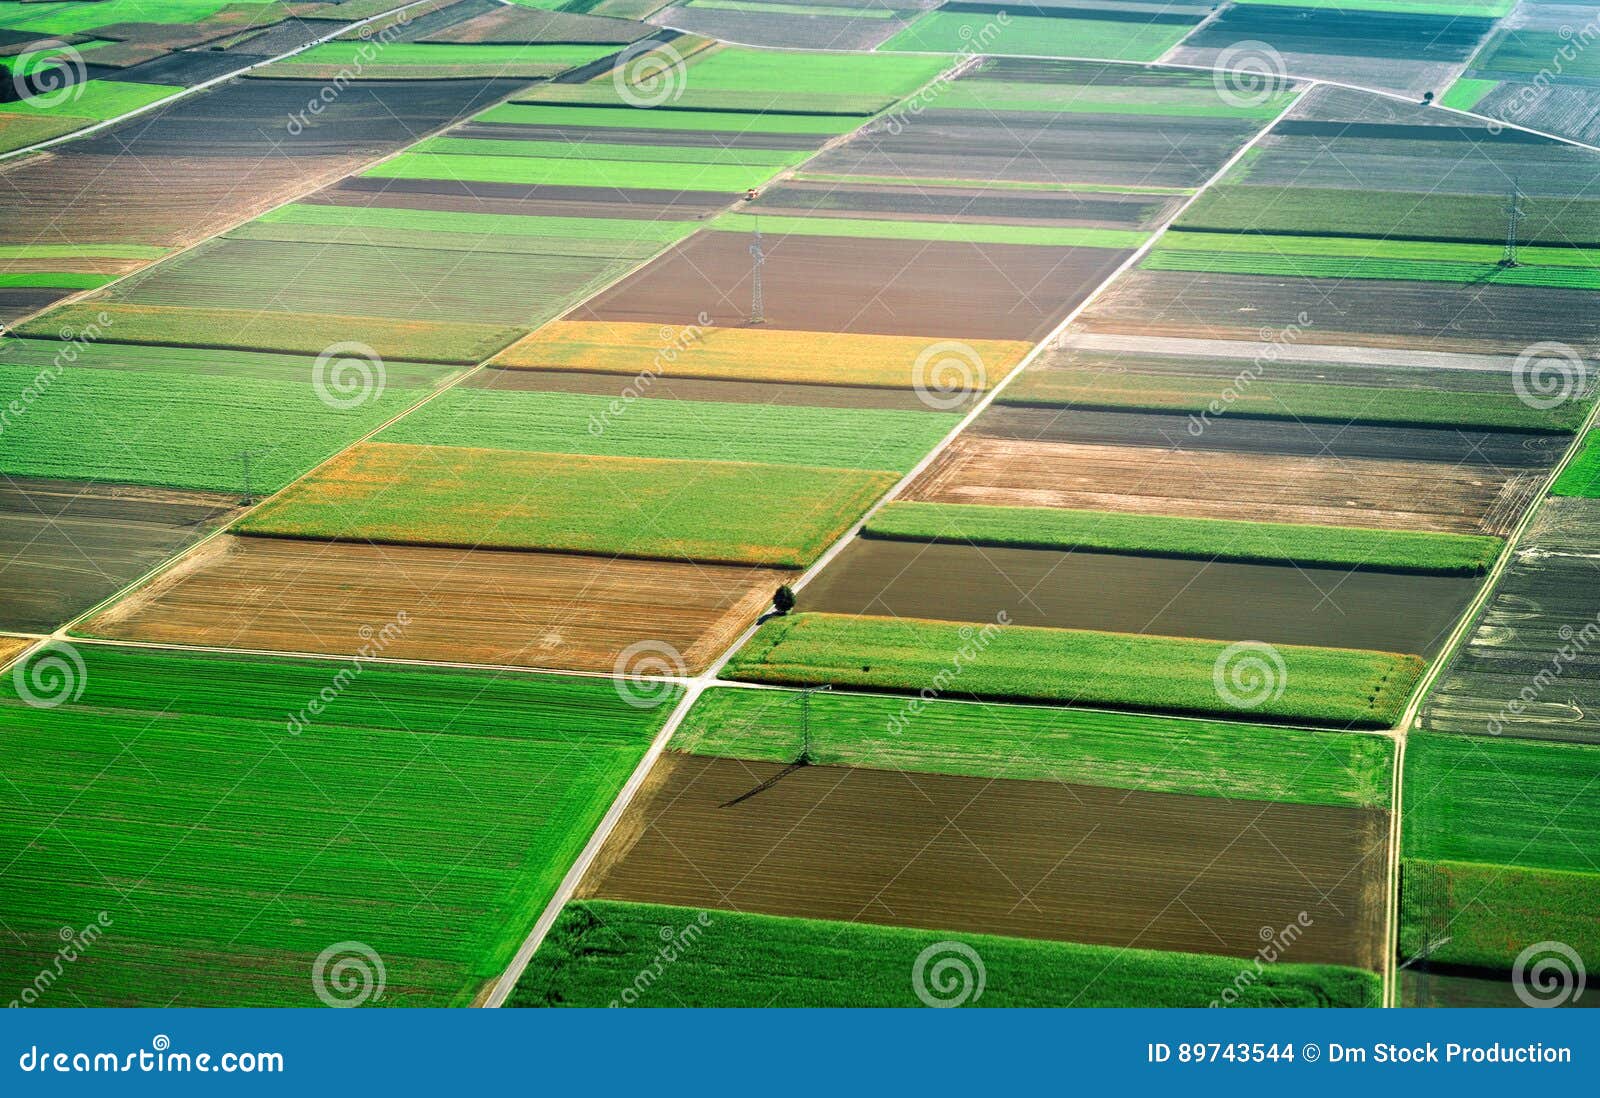 Aerial view of farmlands. stock photo. Image of altitude - 89743544